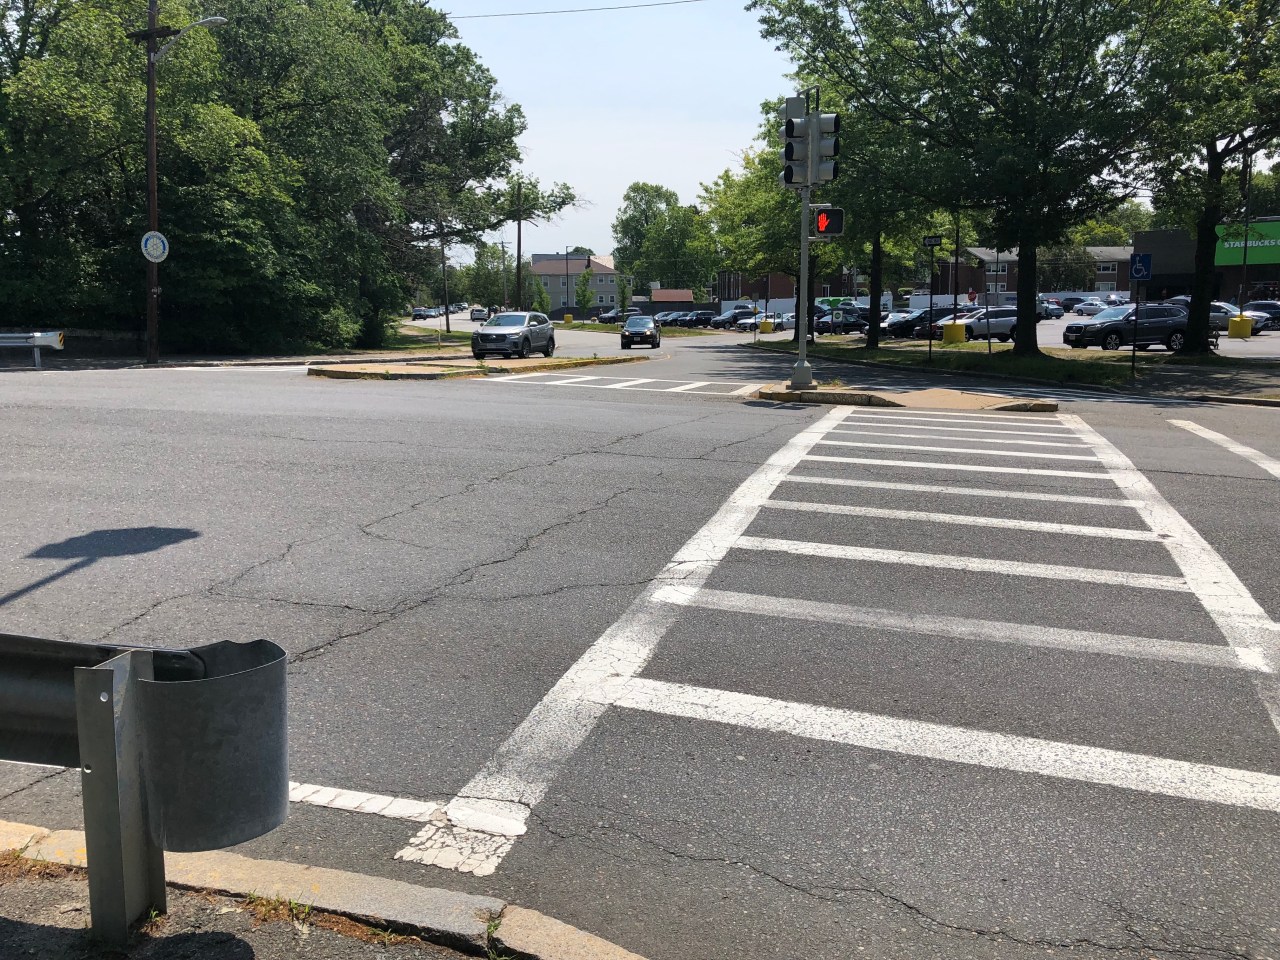 A wide asphalt intersection, with a guardrail in the foreground and a ladder-style crosswalk leading to a traffic island in the distance. In the background, the roadway is lined with leafy trees.